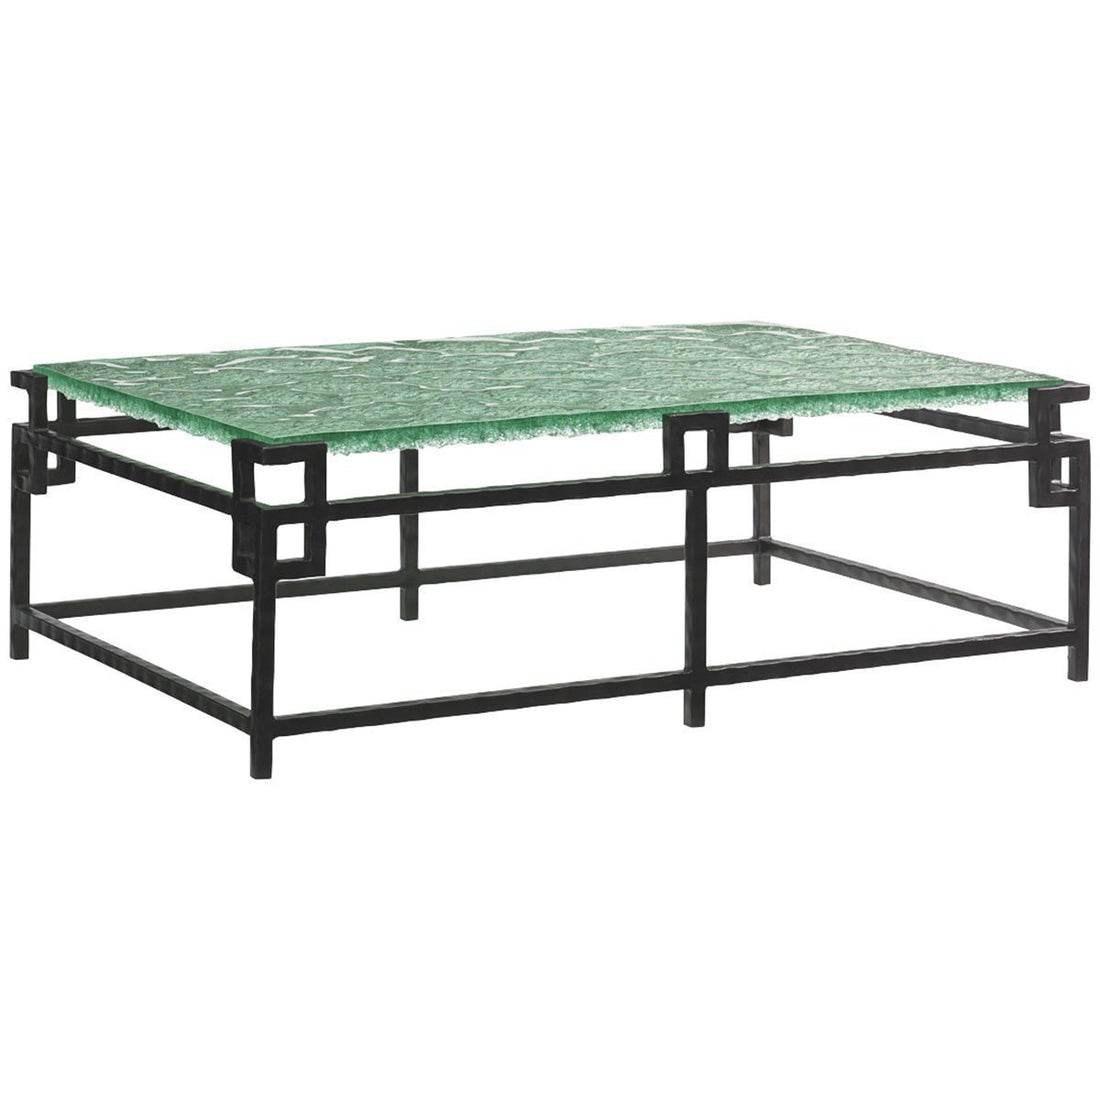 Tommy Bahama Island Fusion Hermes Reef Glass Top Cocktail Table